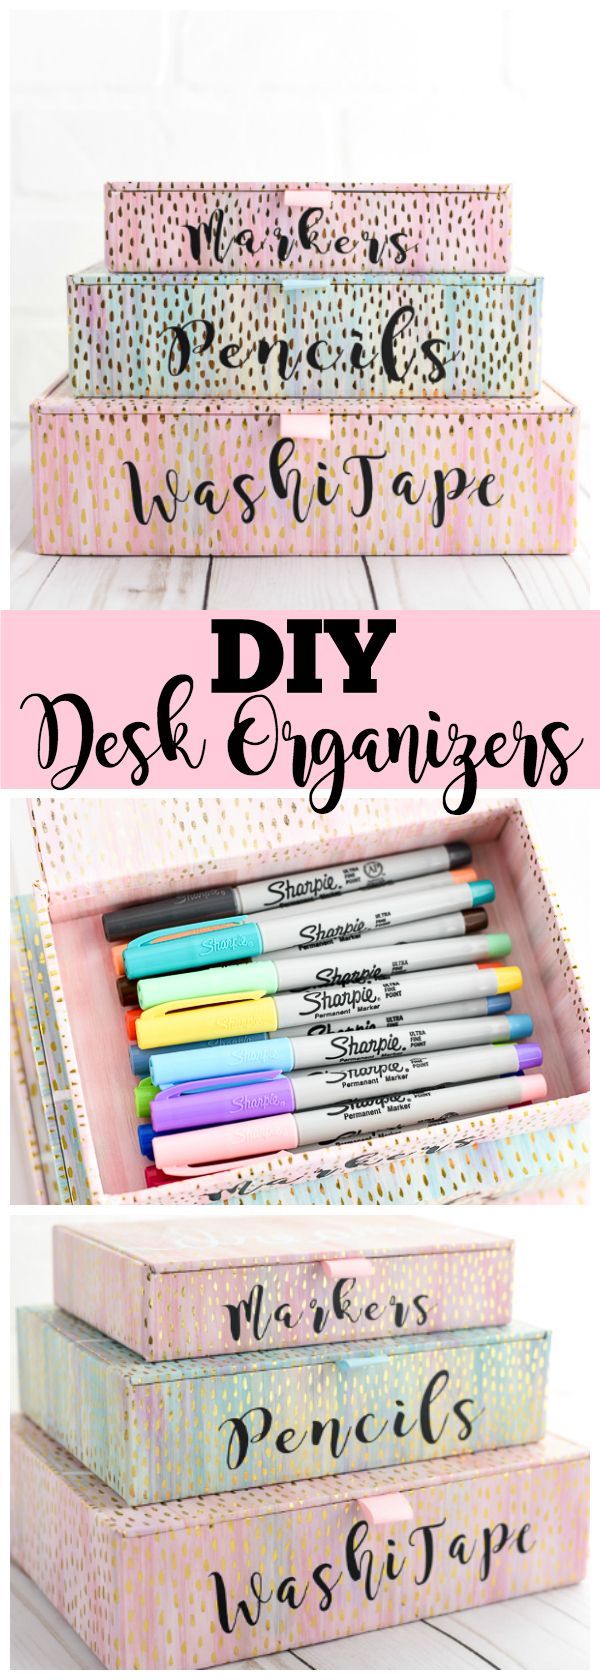 25 Way to Organize Your Whole House -   diy School Supplies organizers